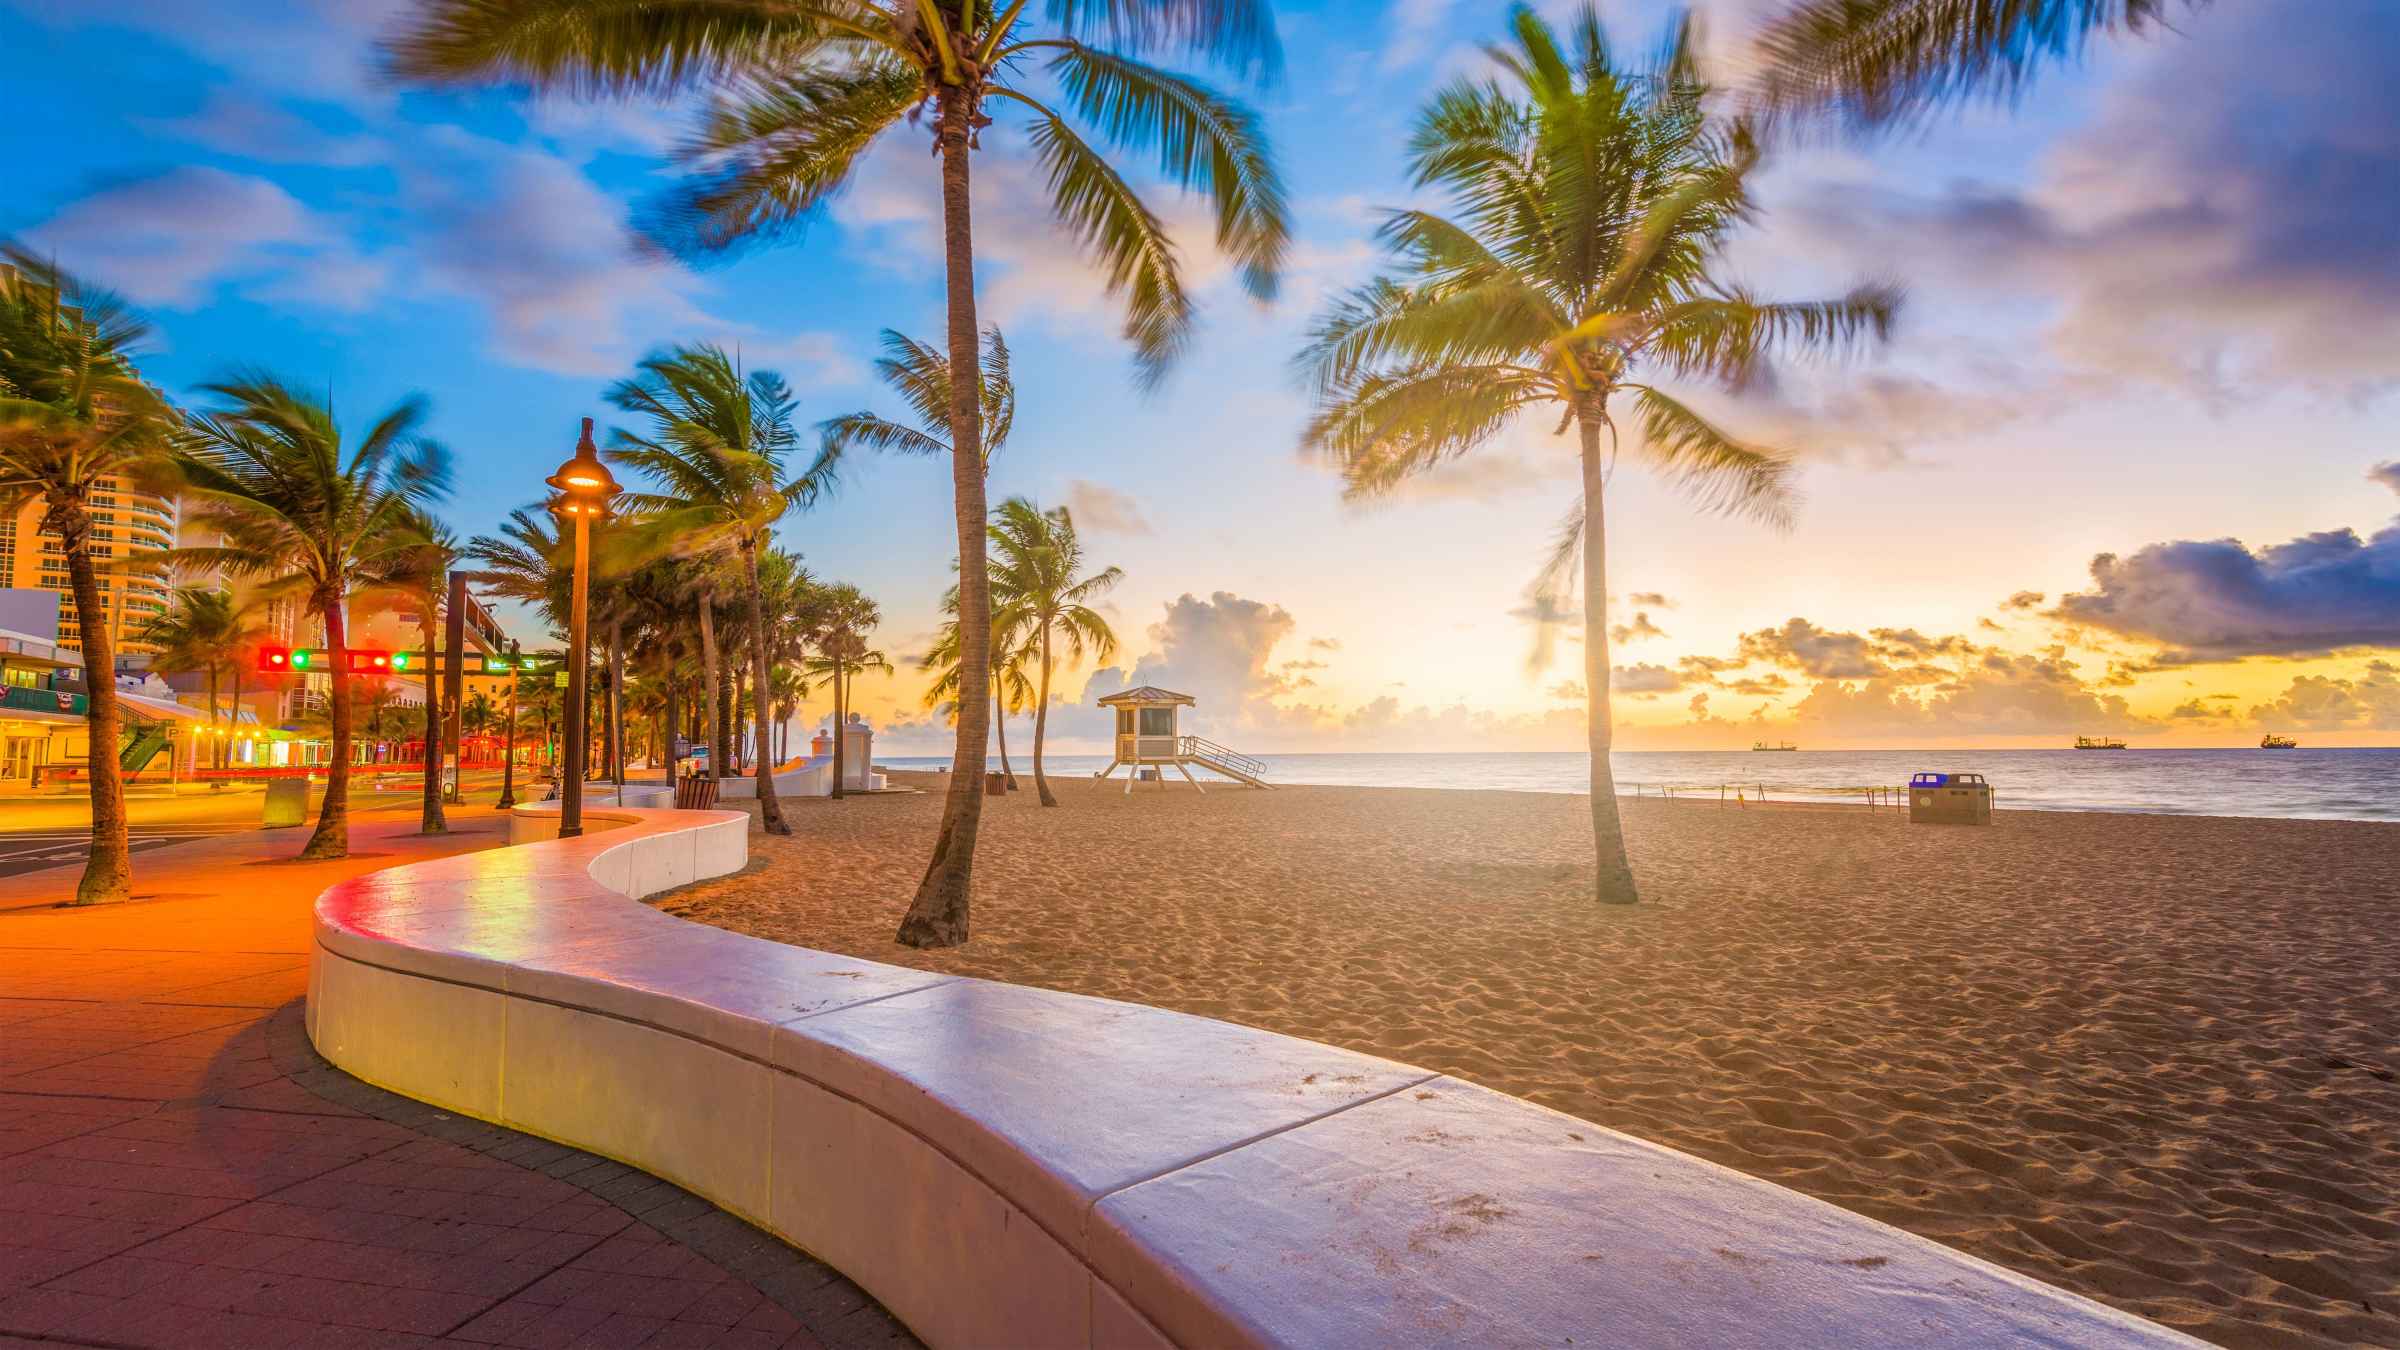 The BEST Fort Lauderdale Walking Tours 2022 - FREE Cancellation